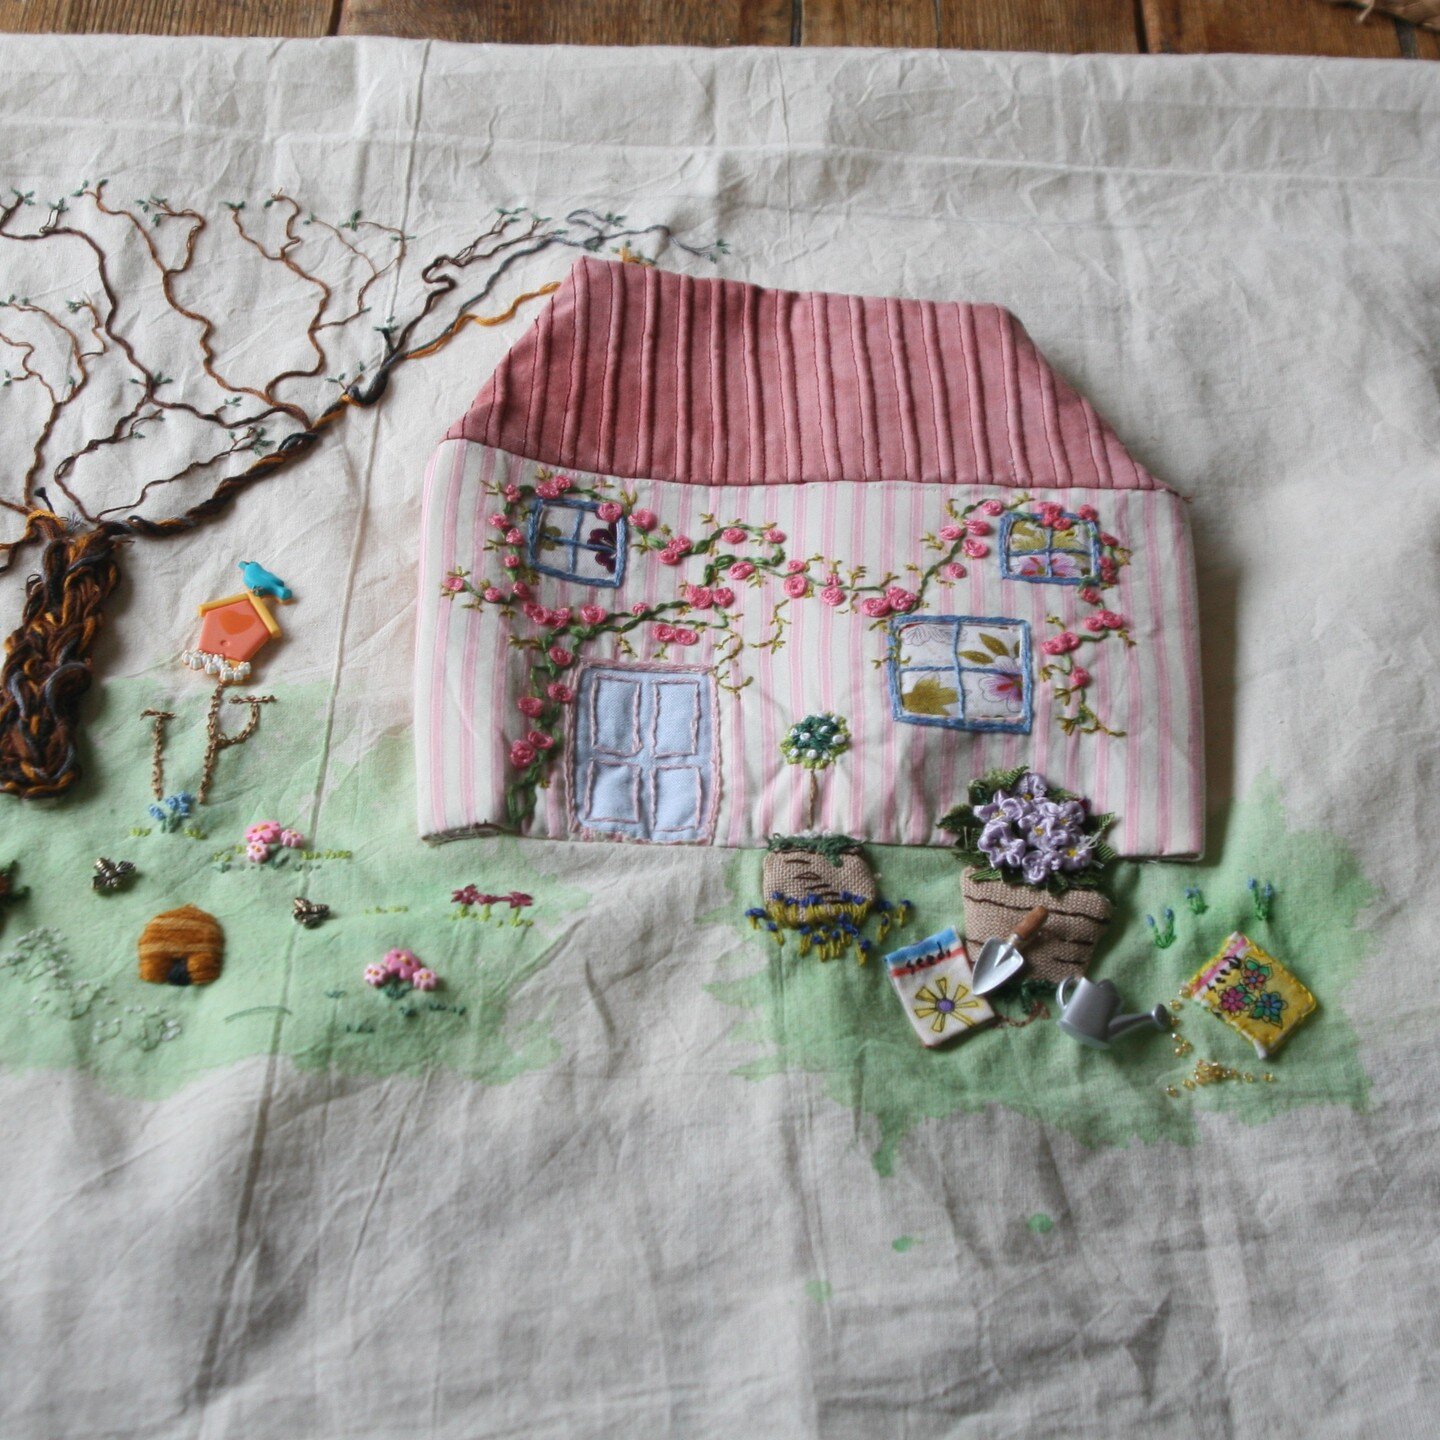 The Rose Cottage pocket from The Village Bag by Carolyn Pearce